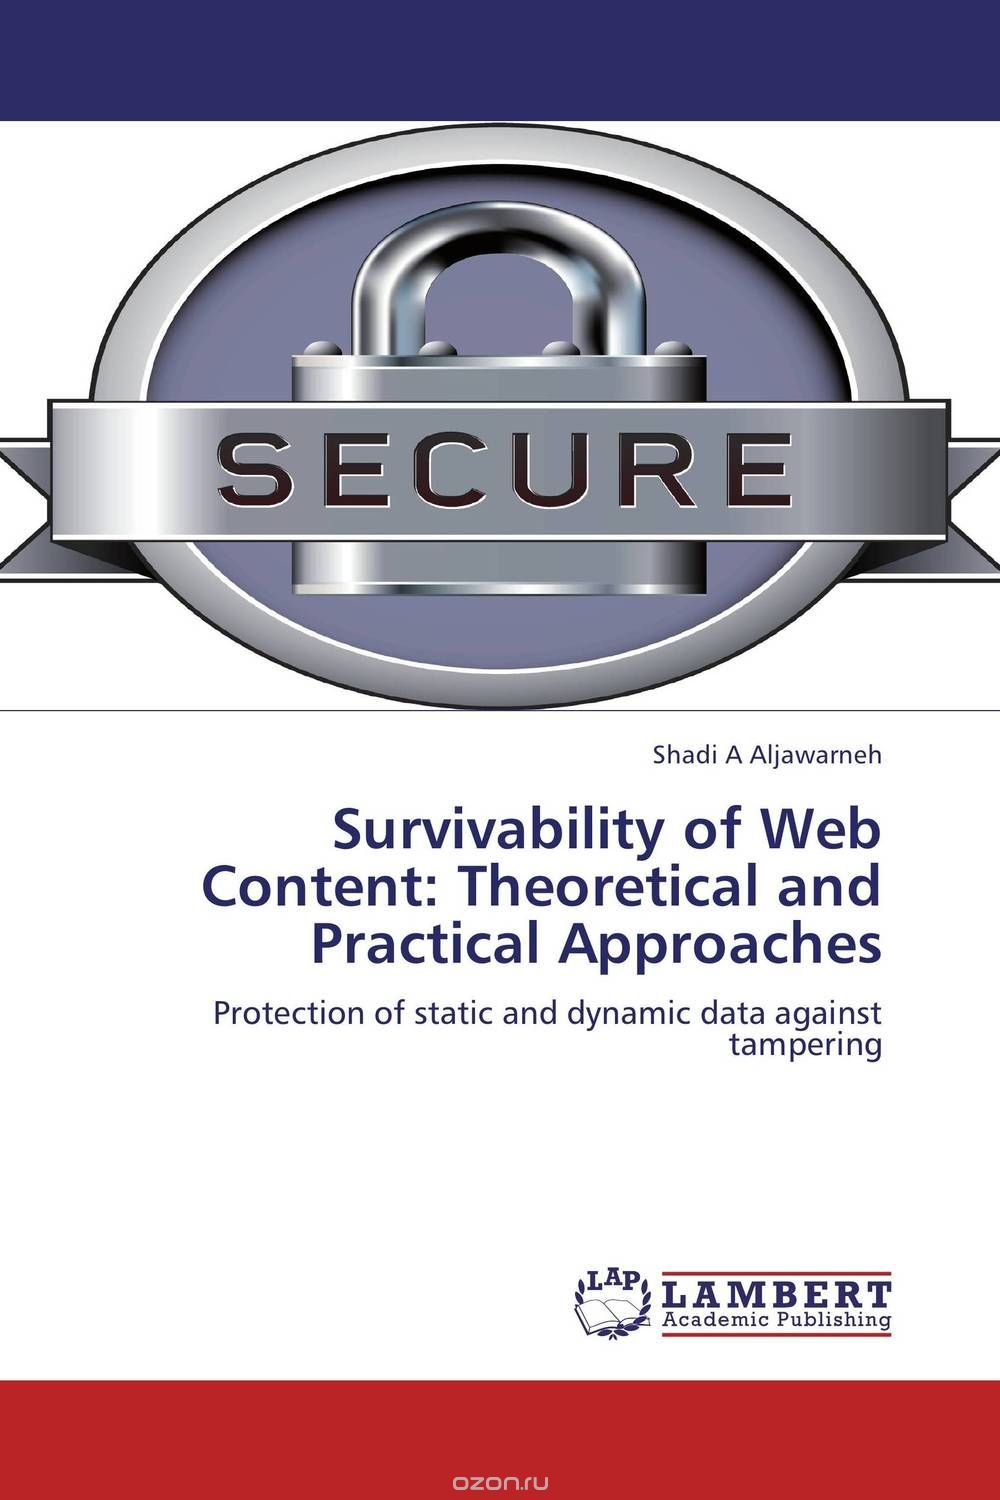 Survivability of Web Content: Theoretical and Practical Approaches